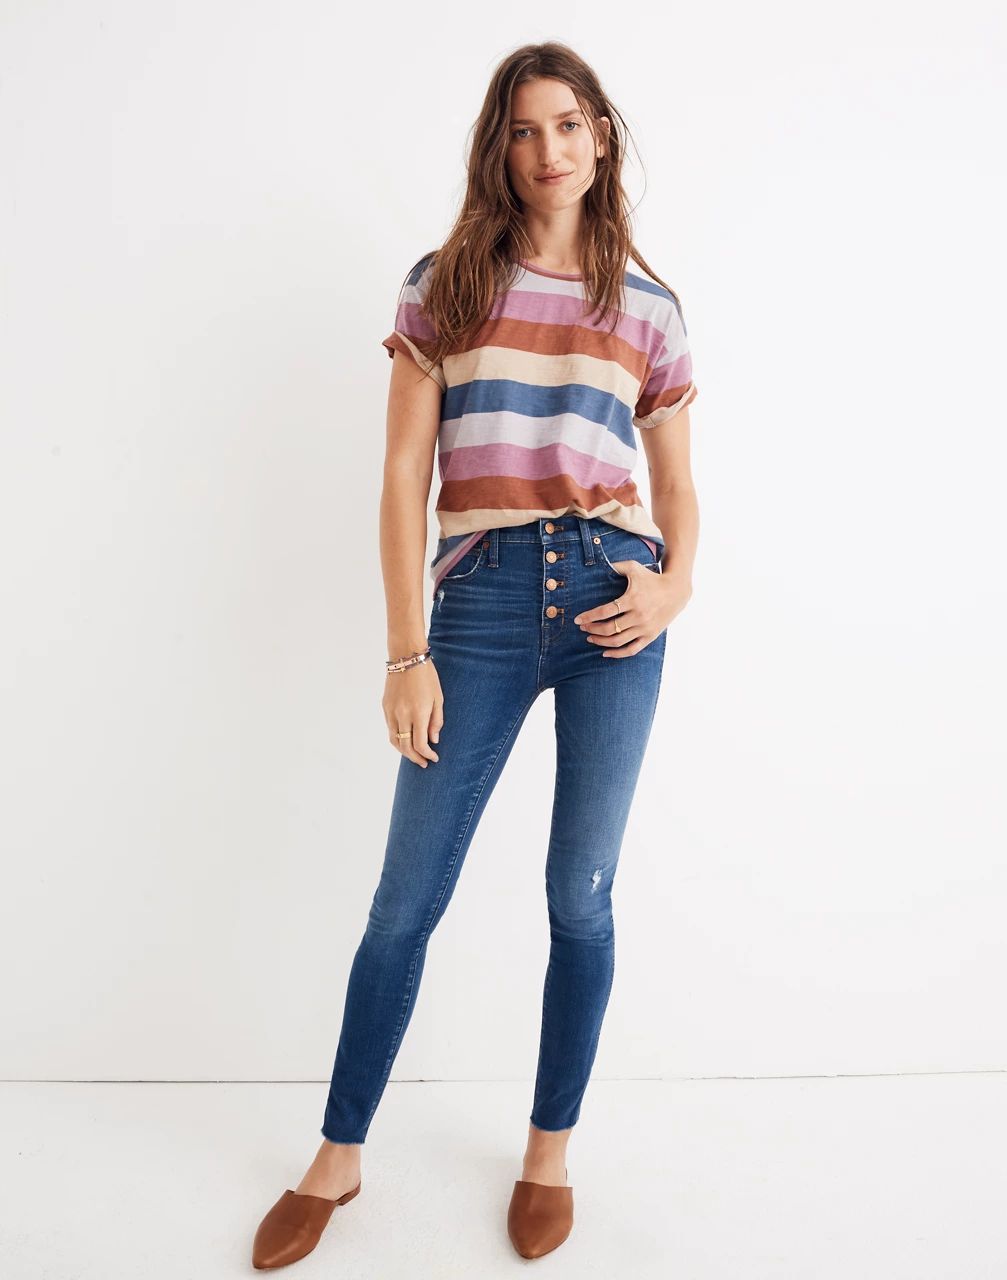 10" High-Rise Skinny Jeans in Hanna Wash | Madewell